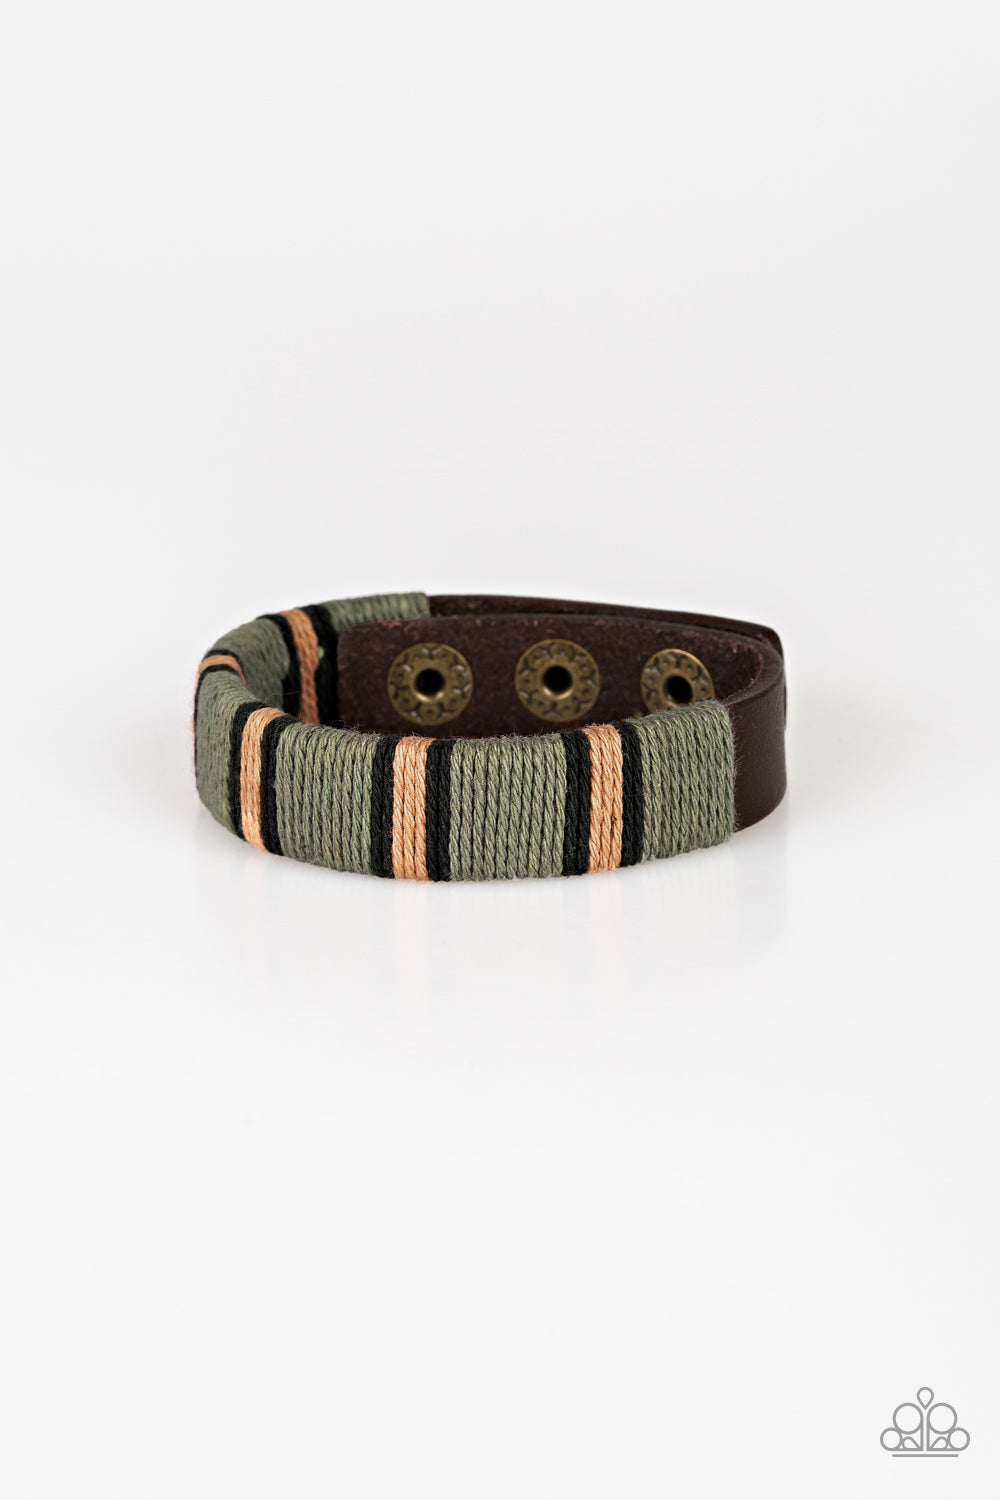 FUTURE FORESTER - BROWN AND GREEN TWINE URBAN BRACELET